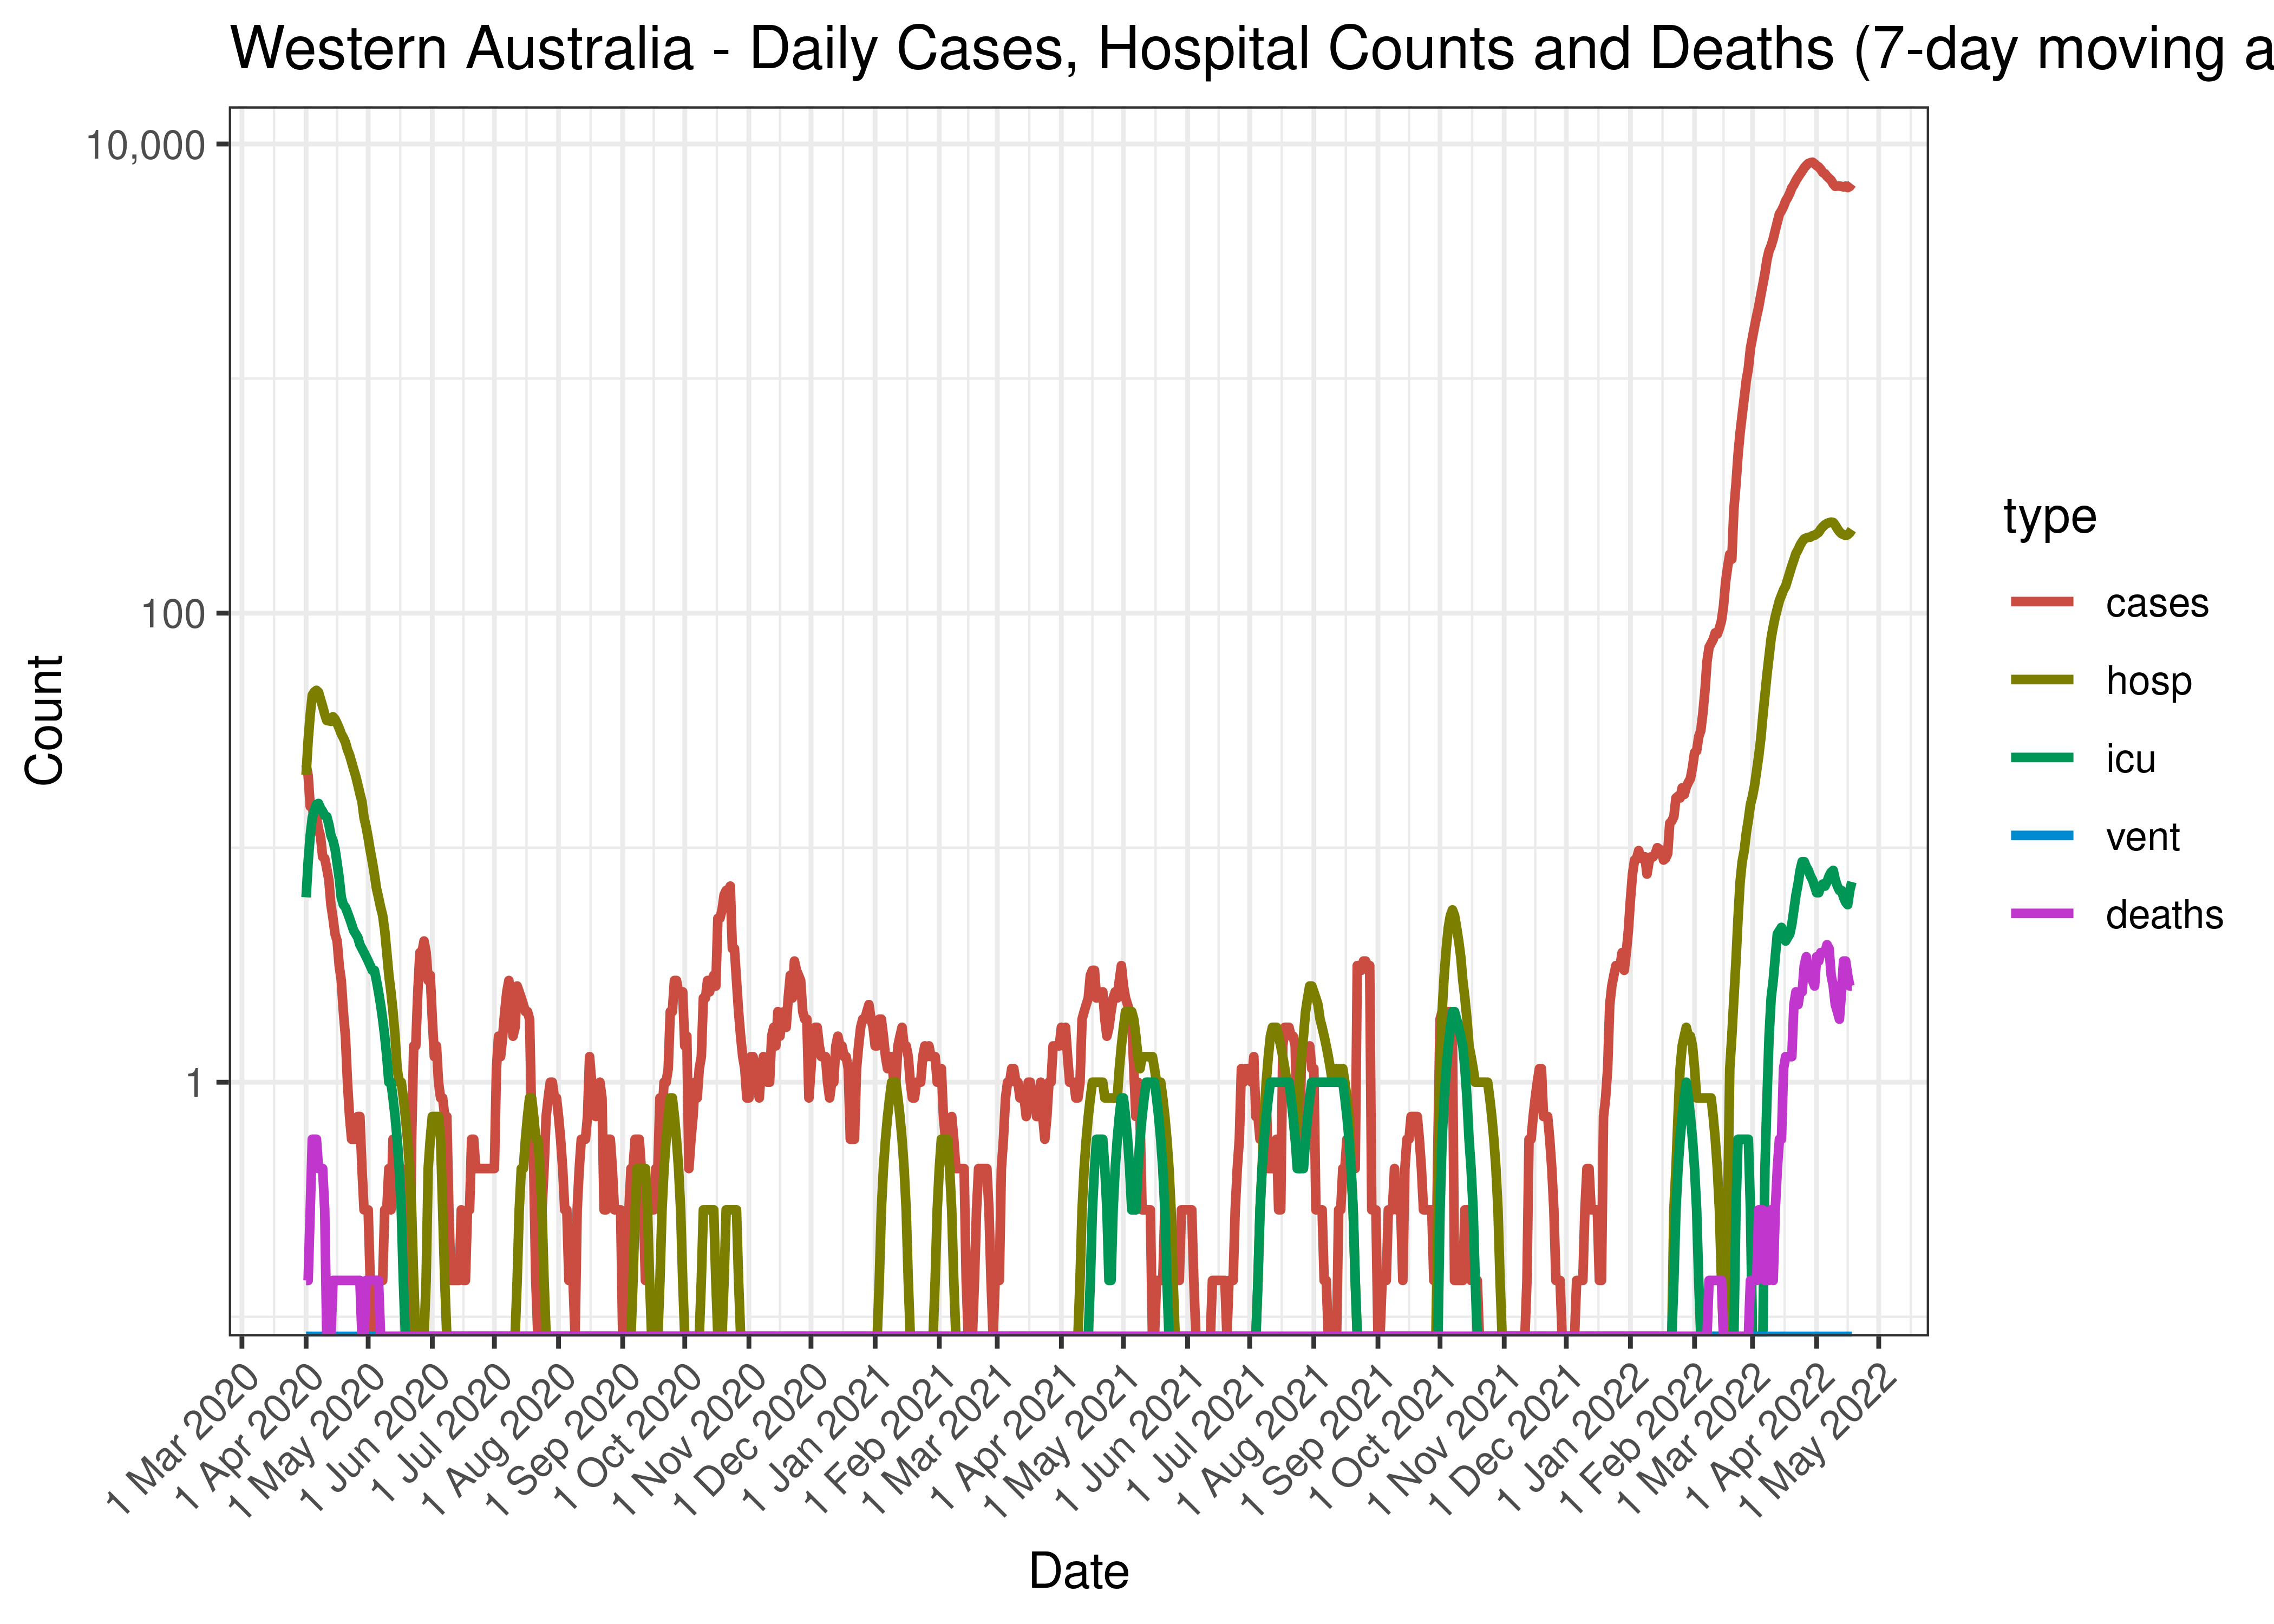 Western Australia - Daily Cases, Hospital Counts and Deaths (7-day moving average)